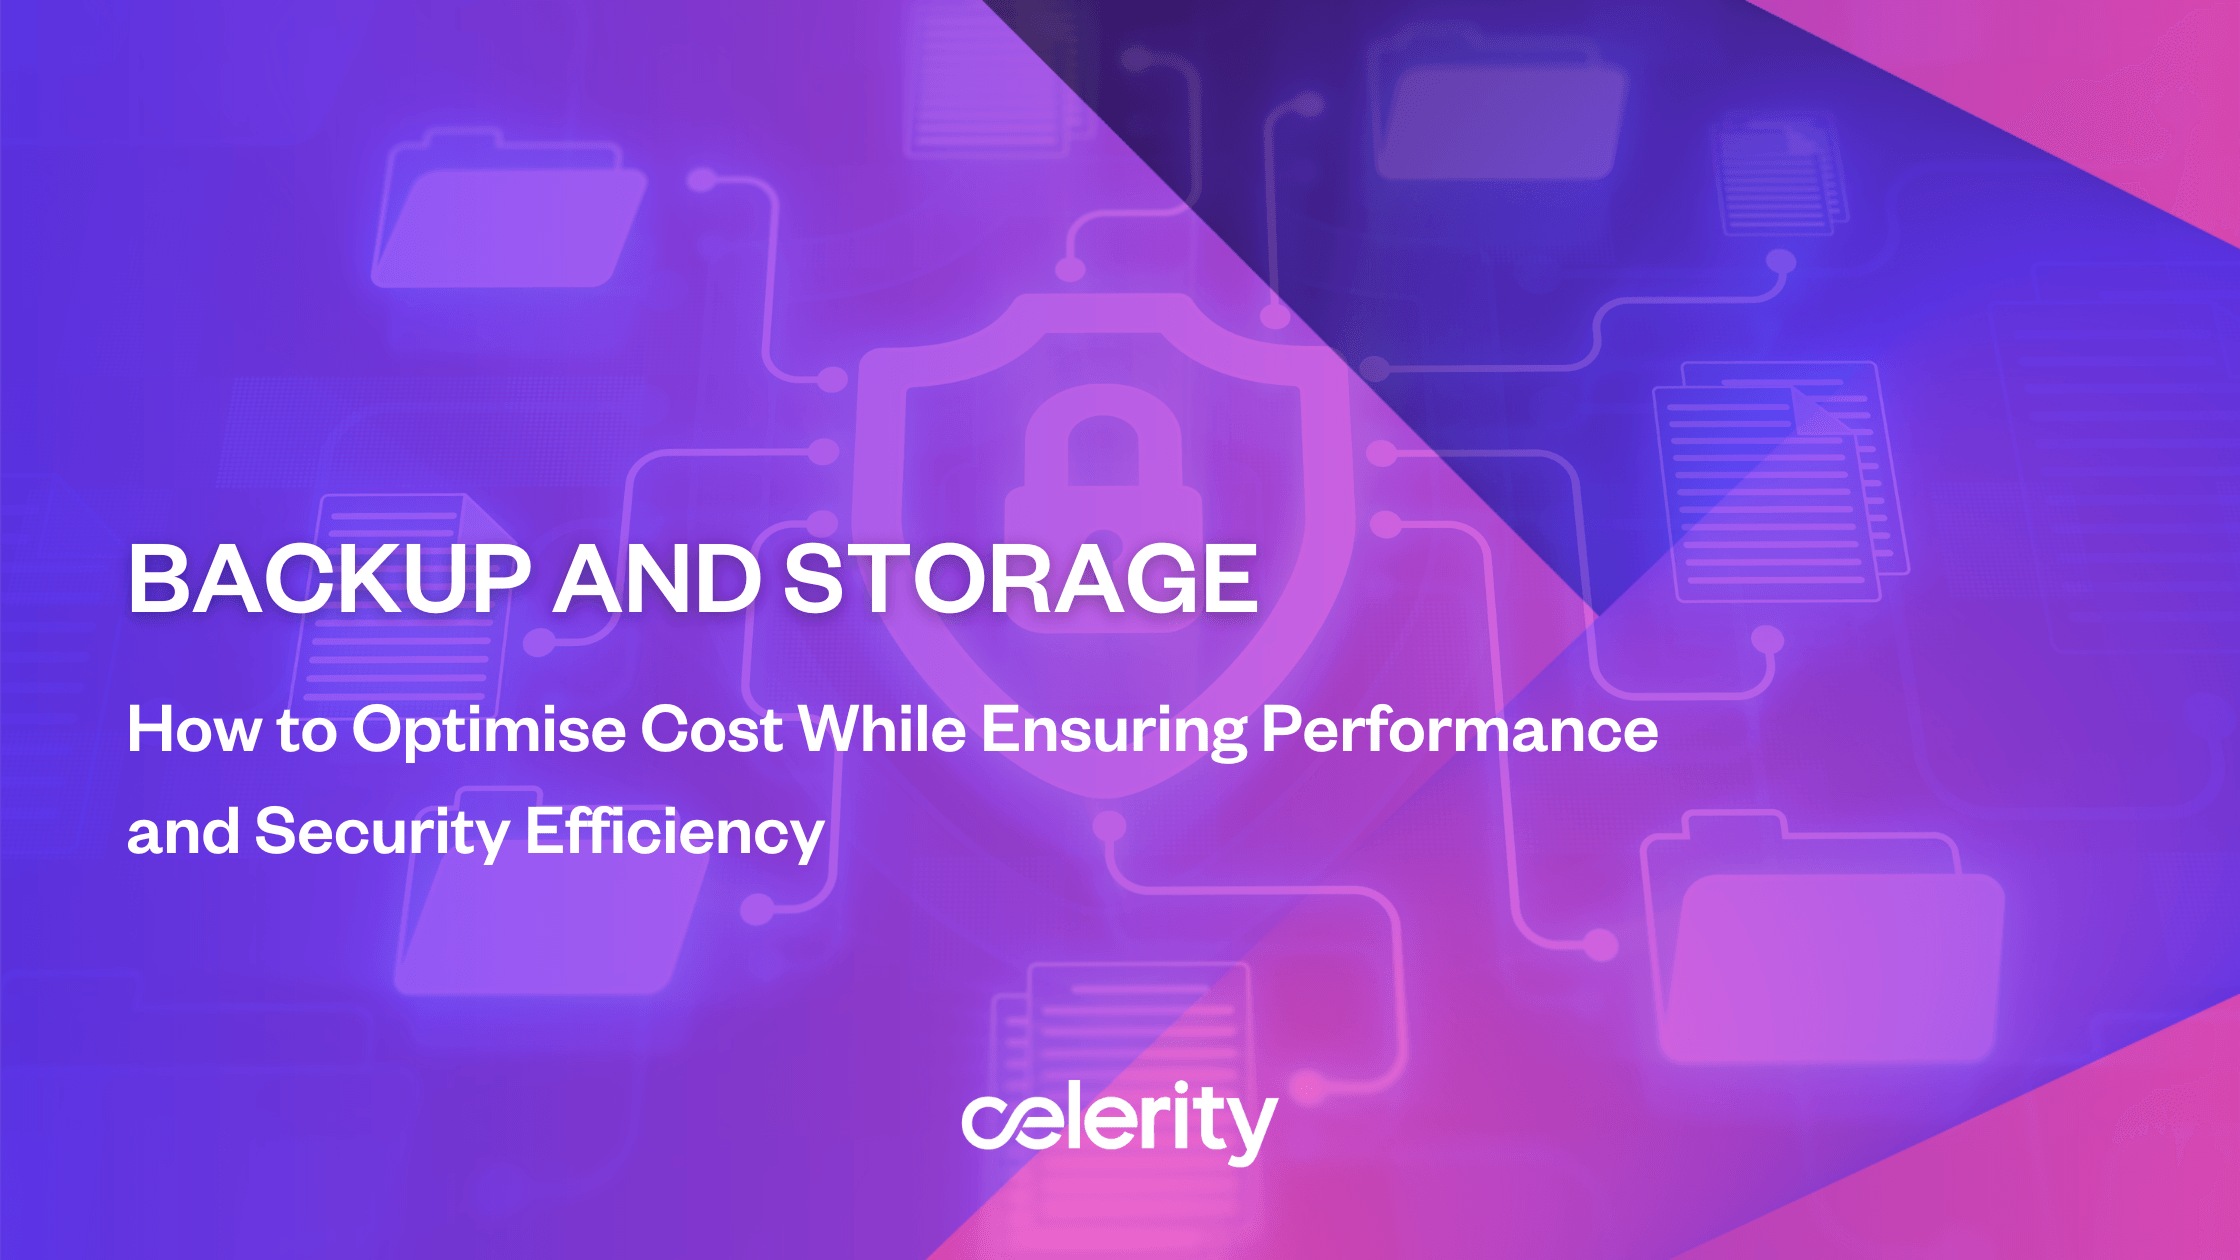 Optimising Cost While Ensuring Performance and Security Efficiency in Backup and Storage 